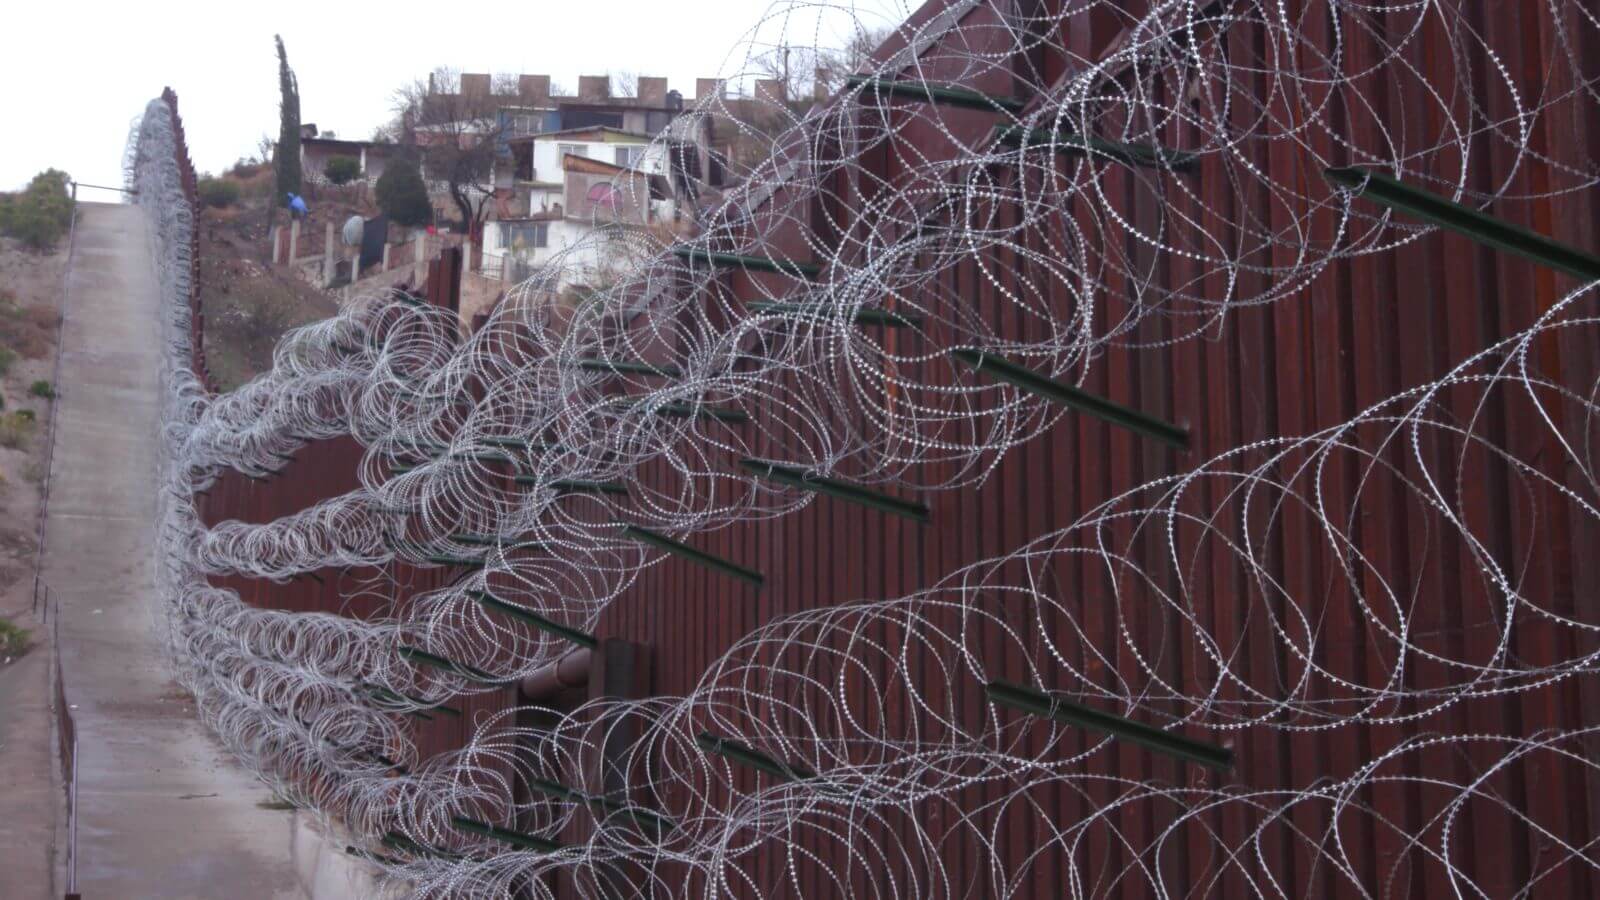 Brown border fence with long, running loops of barbed wire